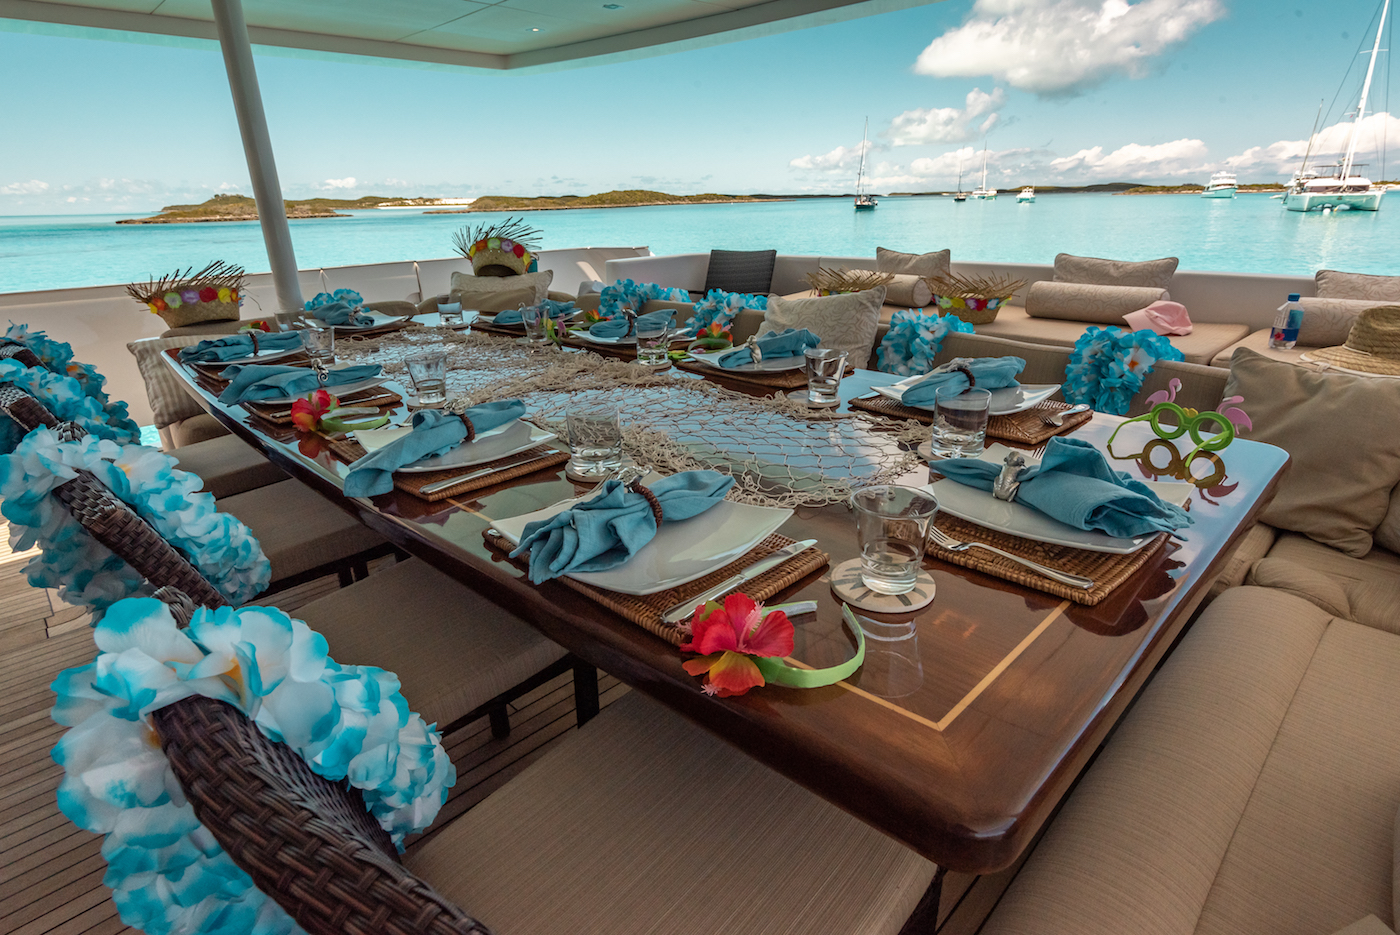 Main Deck - Themed Dining Set Up